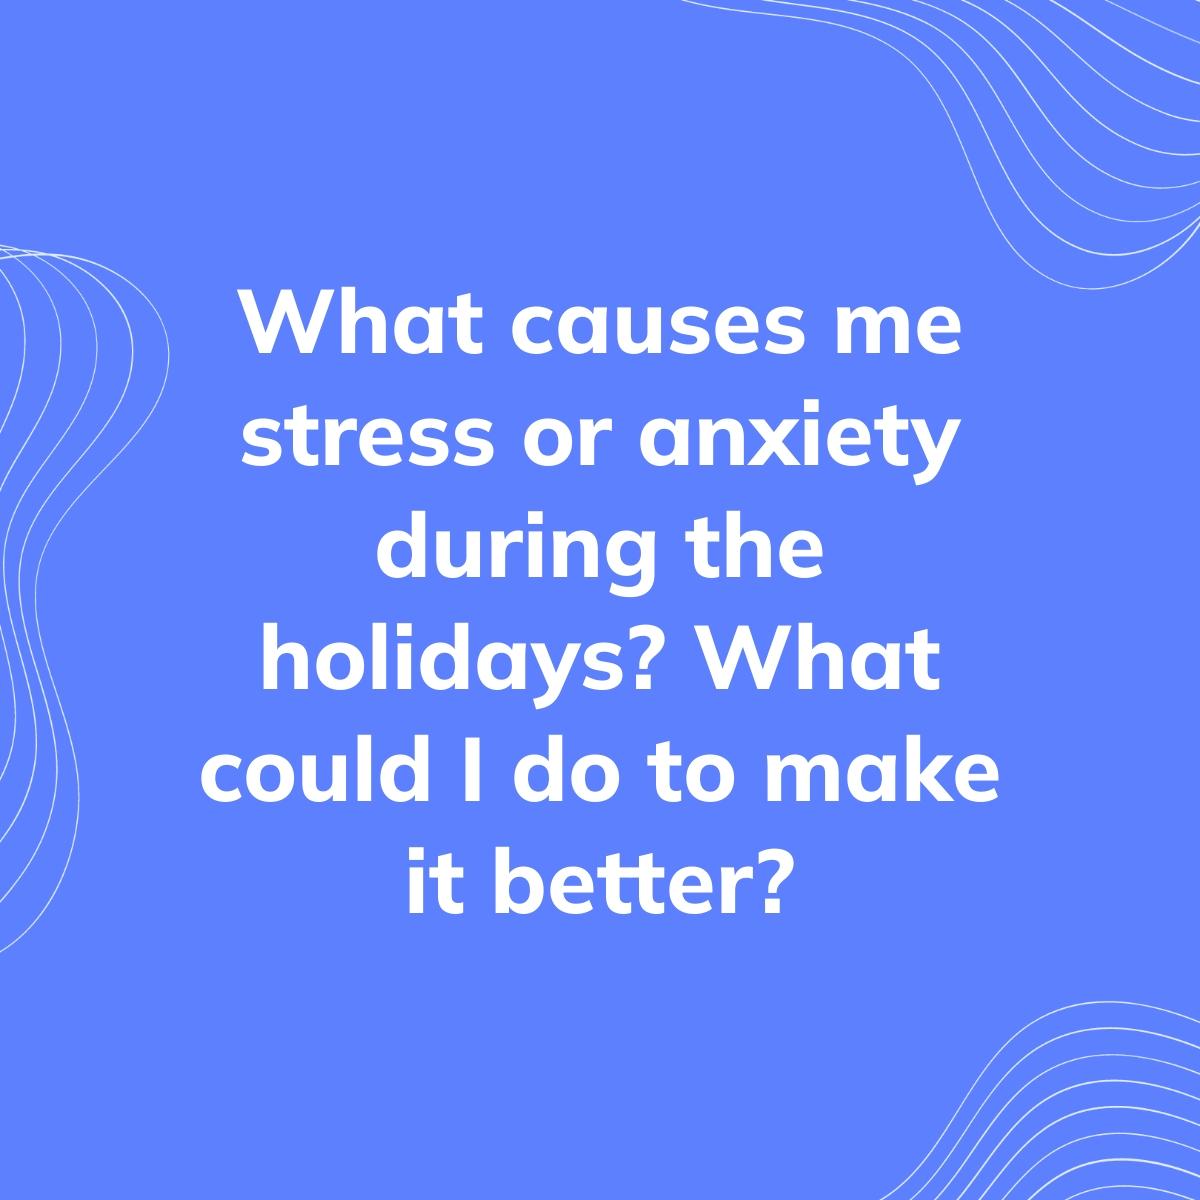 Journal Prompt: What causes me stress or anxiety during the holidays? What could I do to make it better?